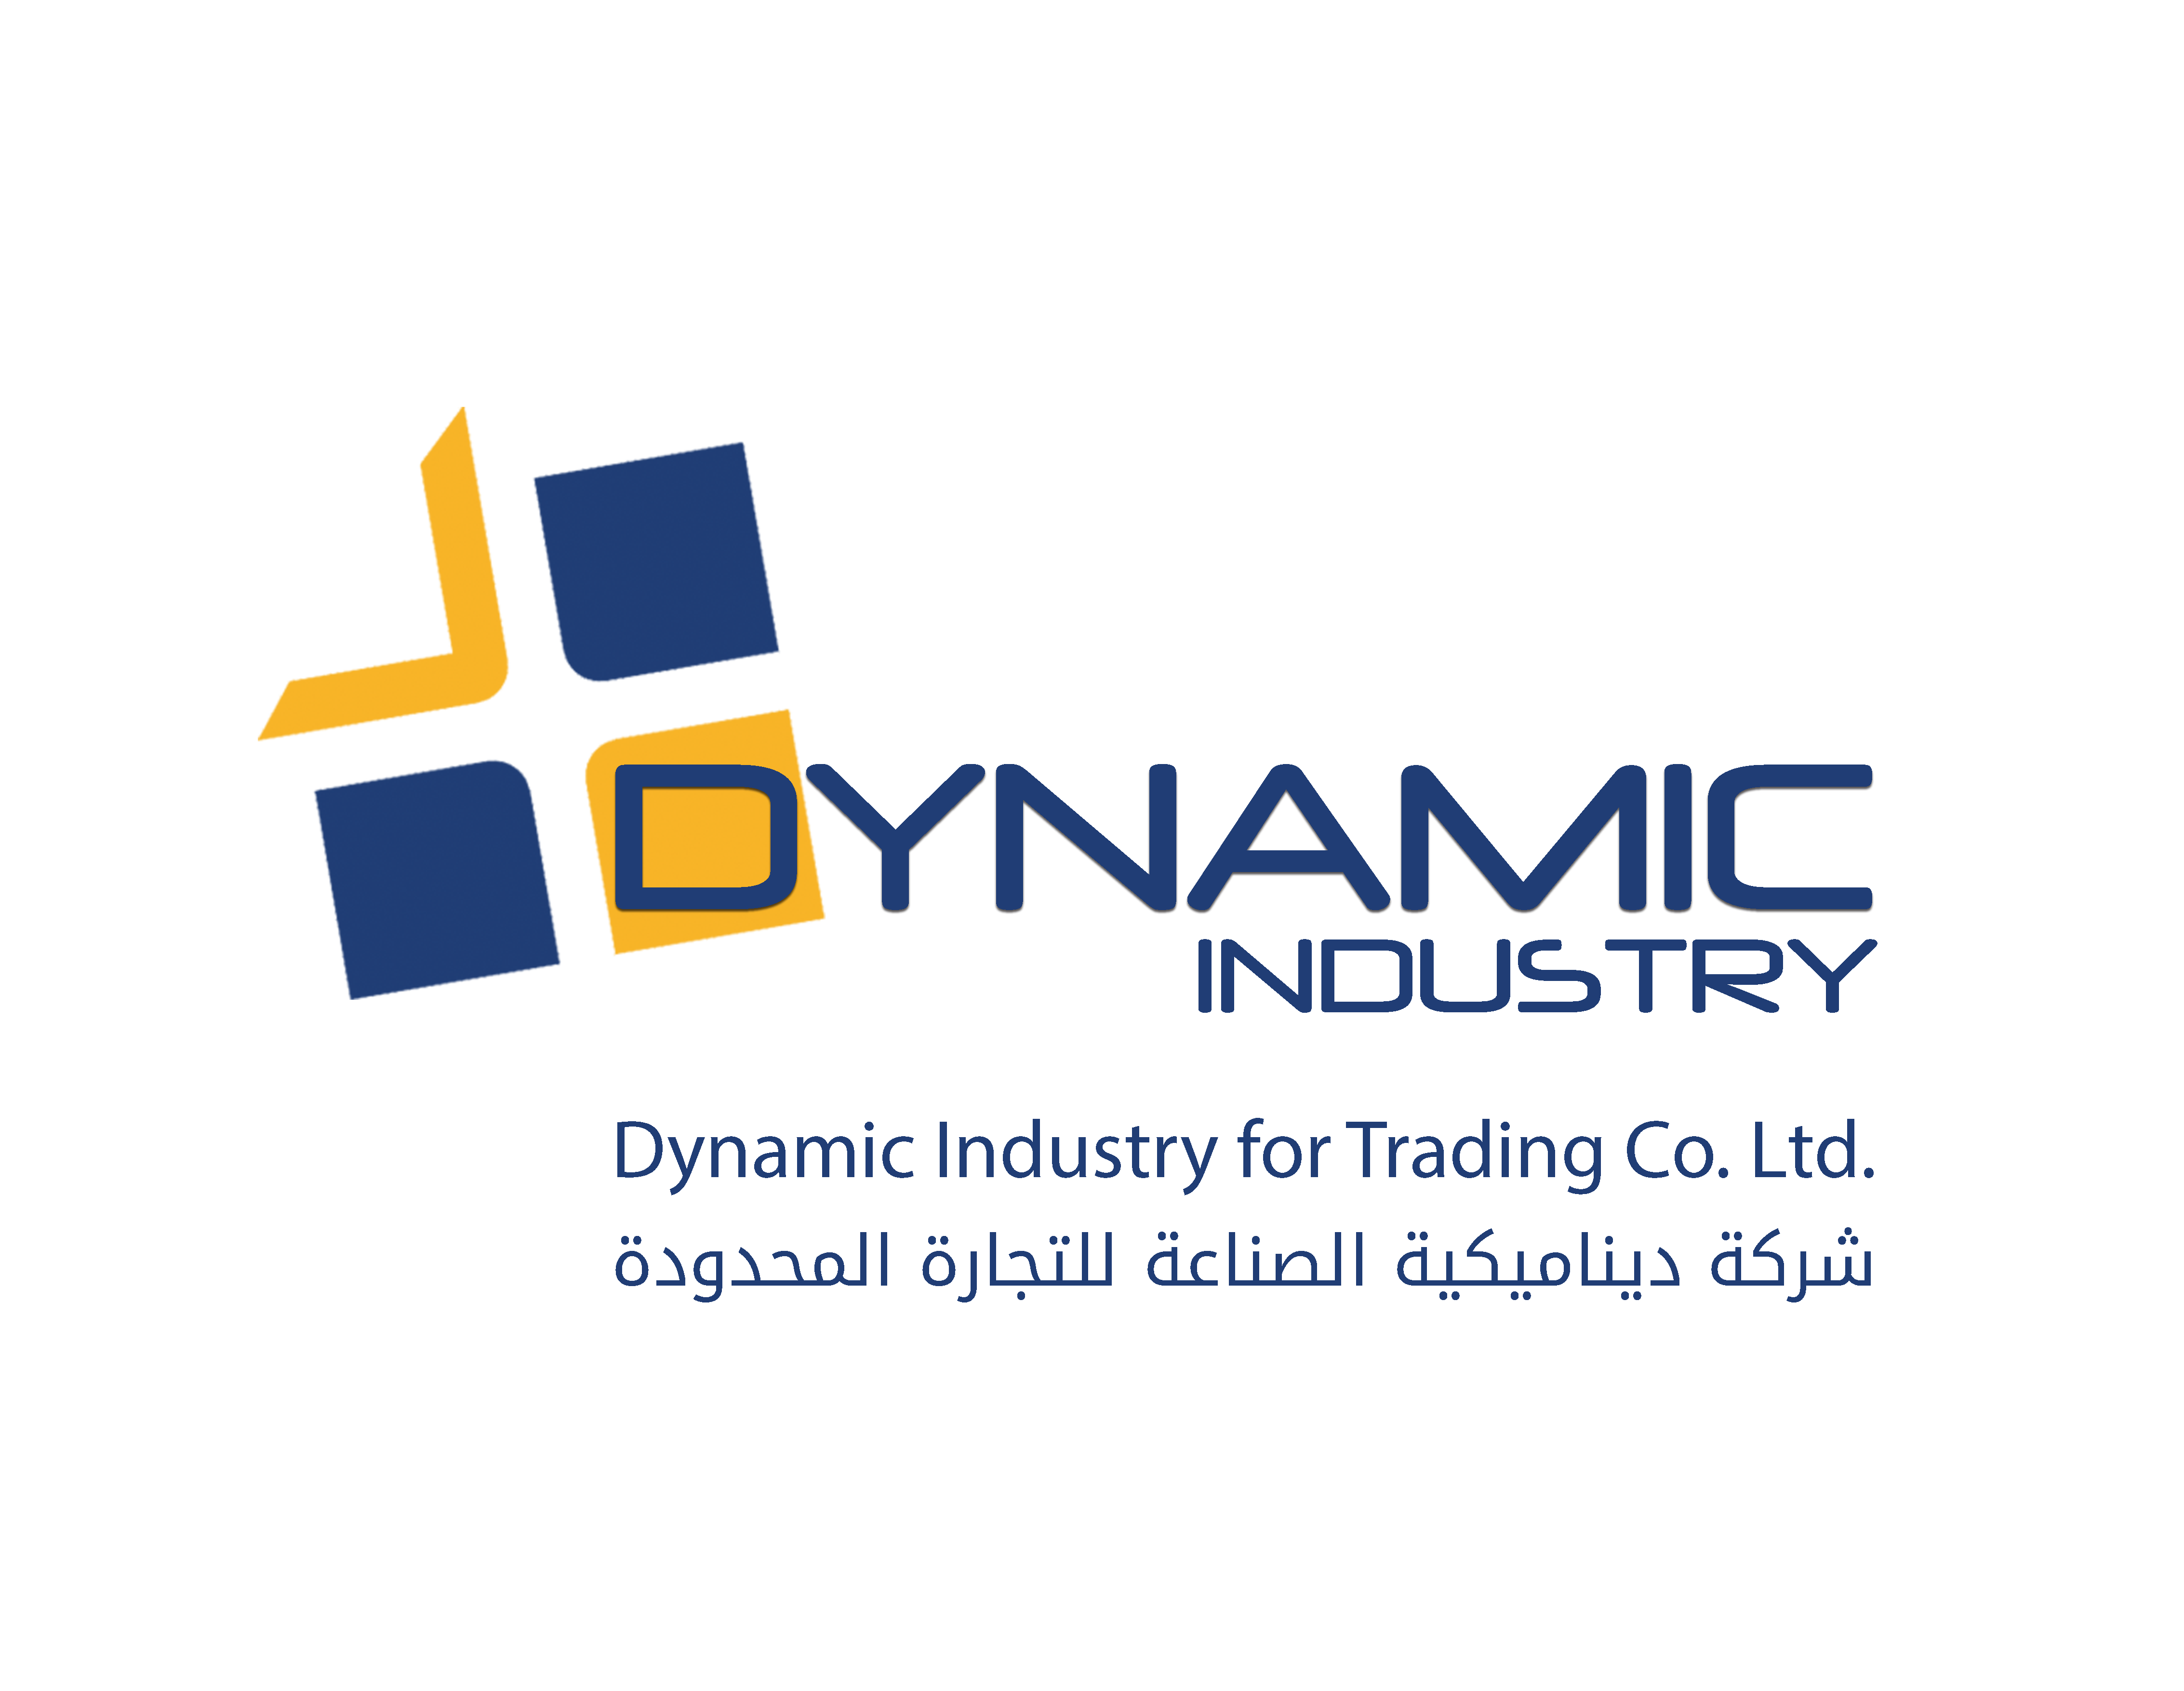 Dynamic Industry for Trading Co. Ltd.